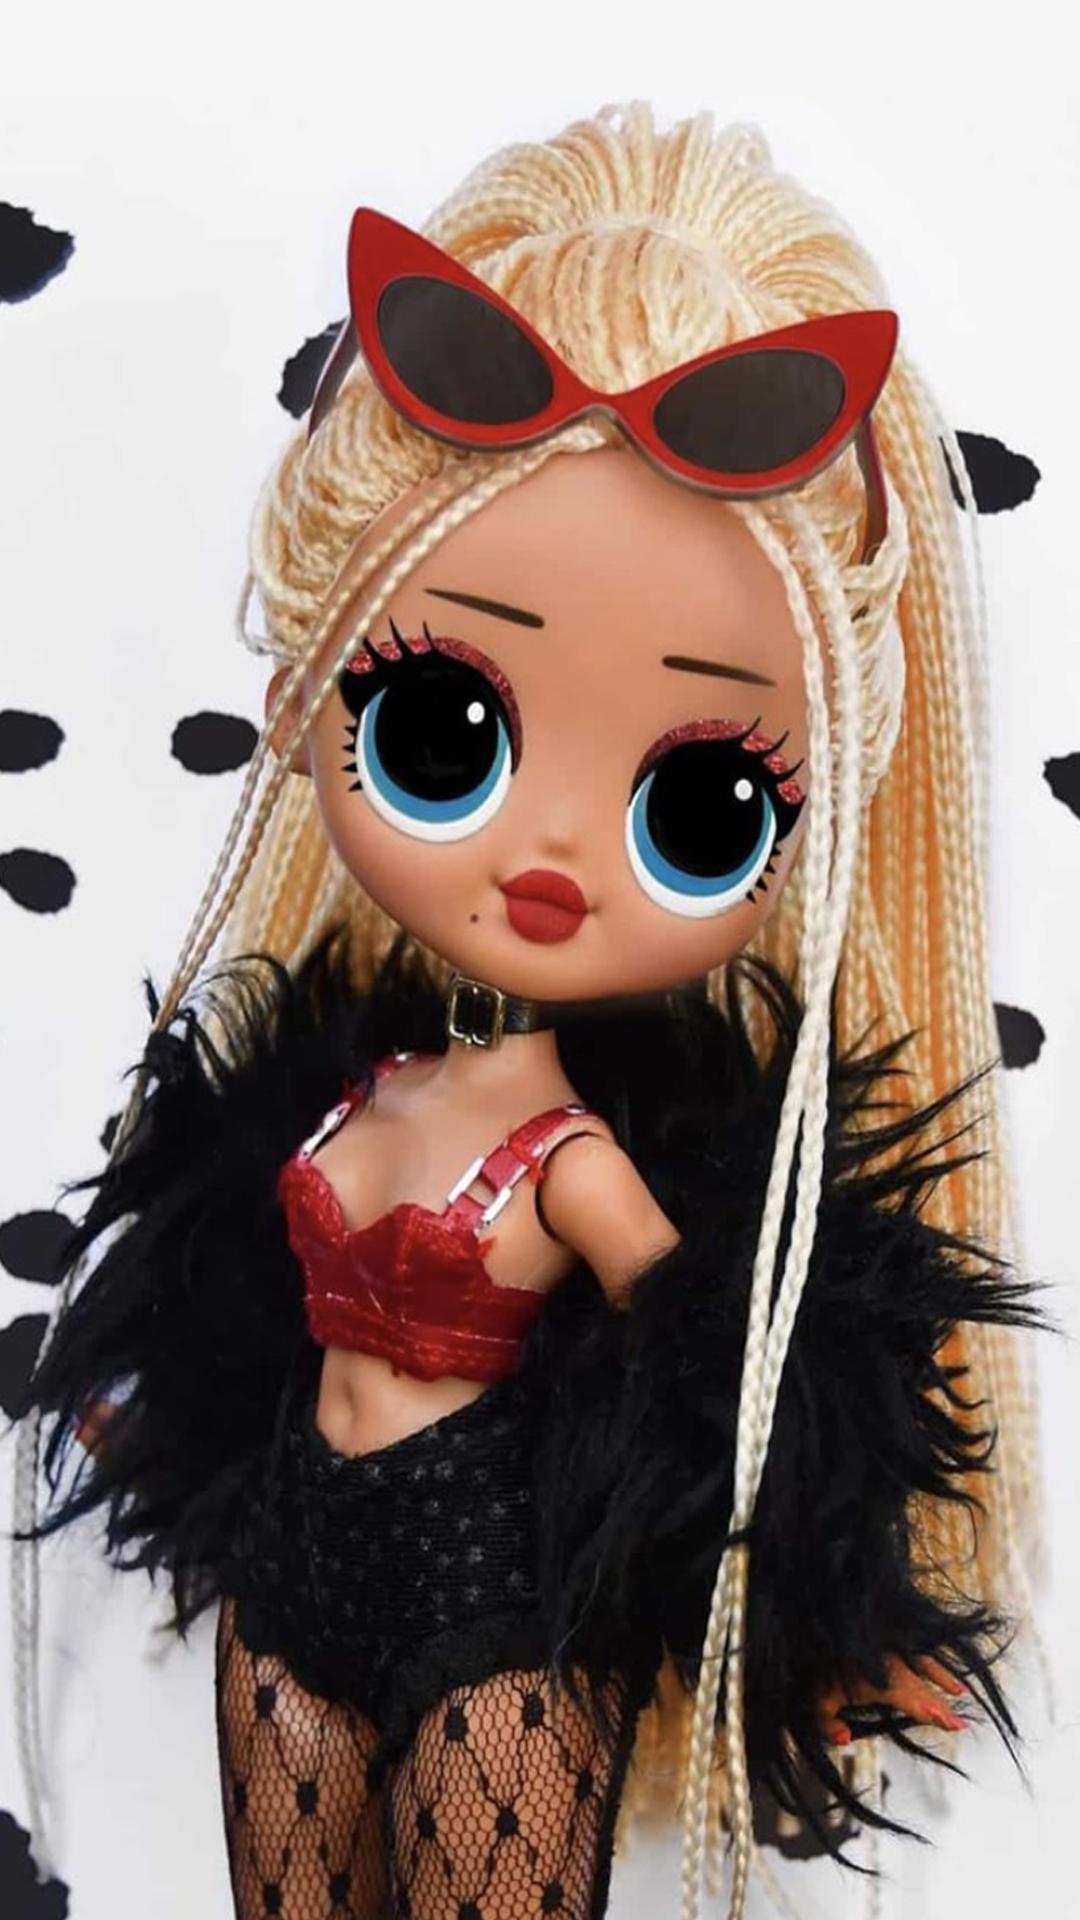 Dolls Big Sister Wallpaper for Android - APK Download